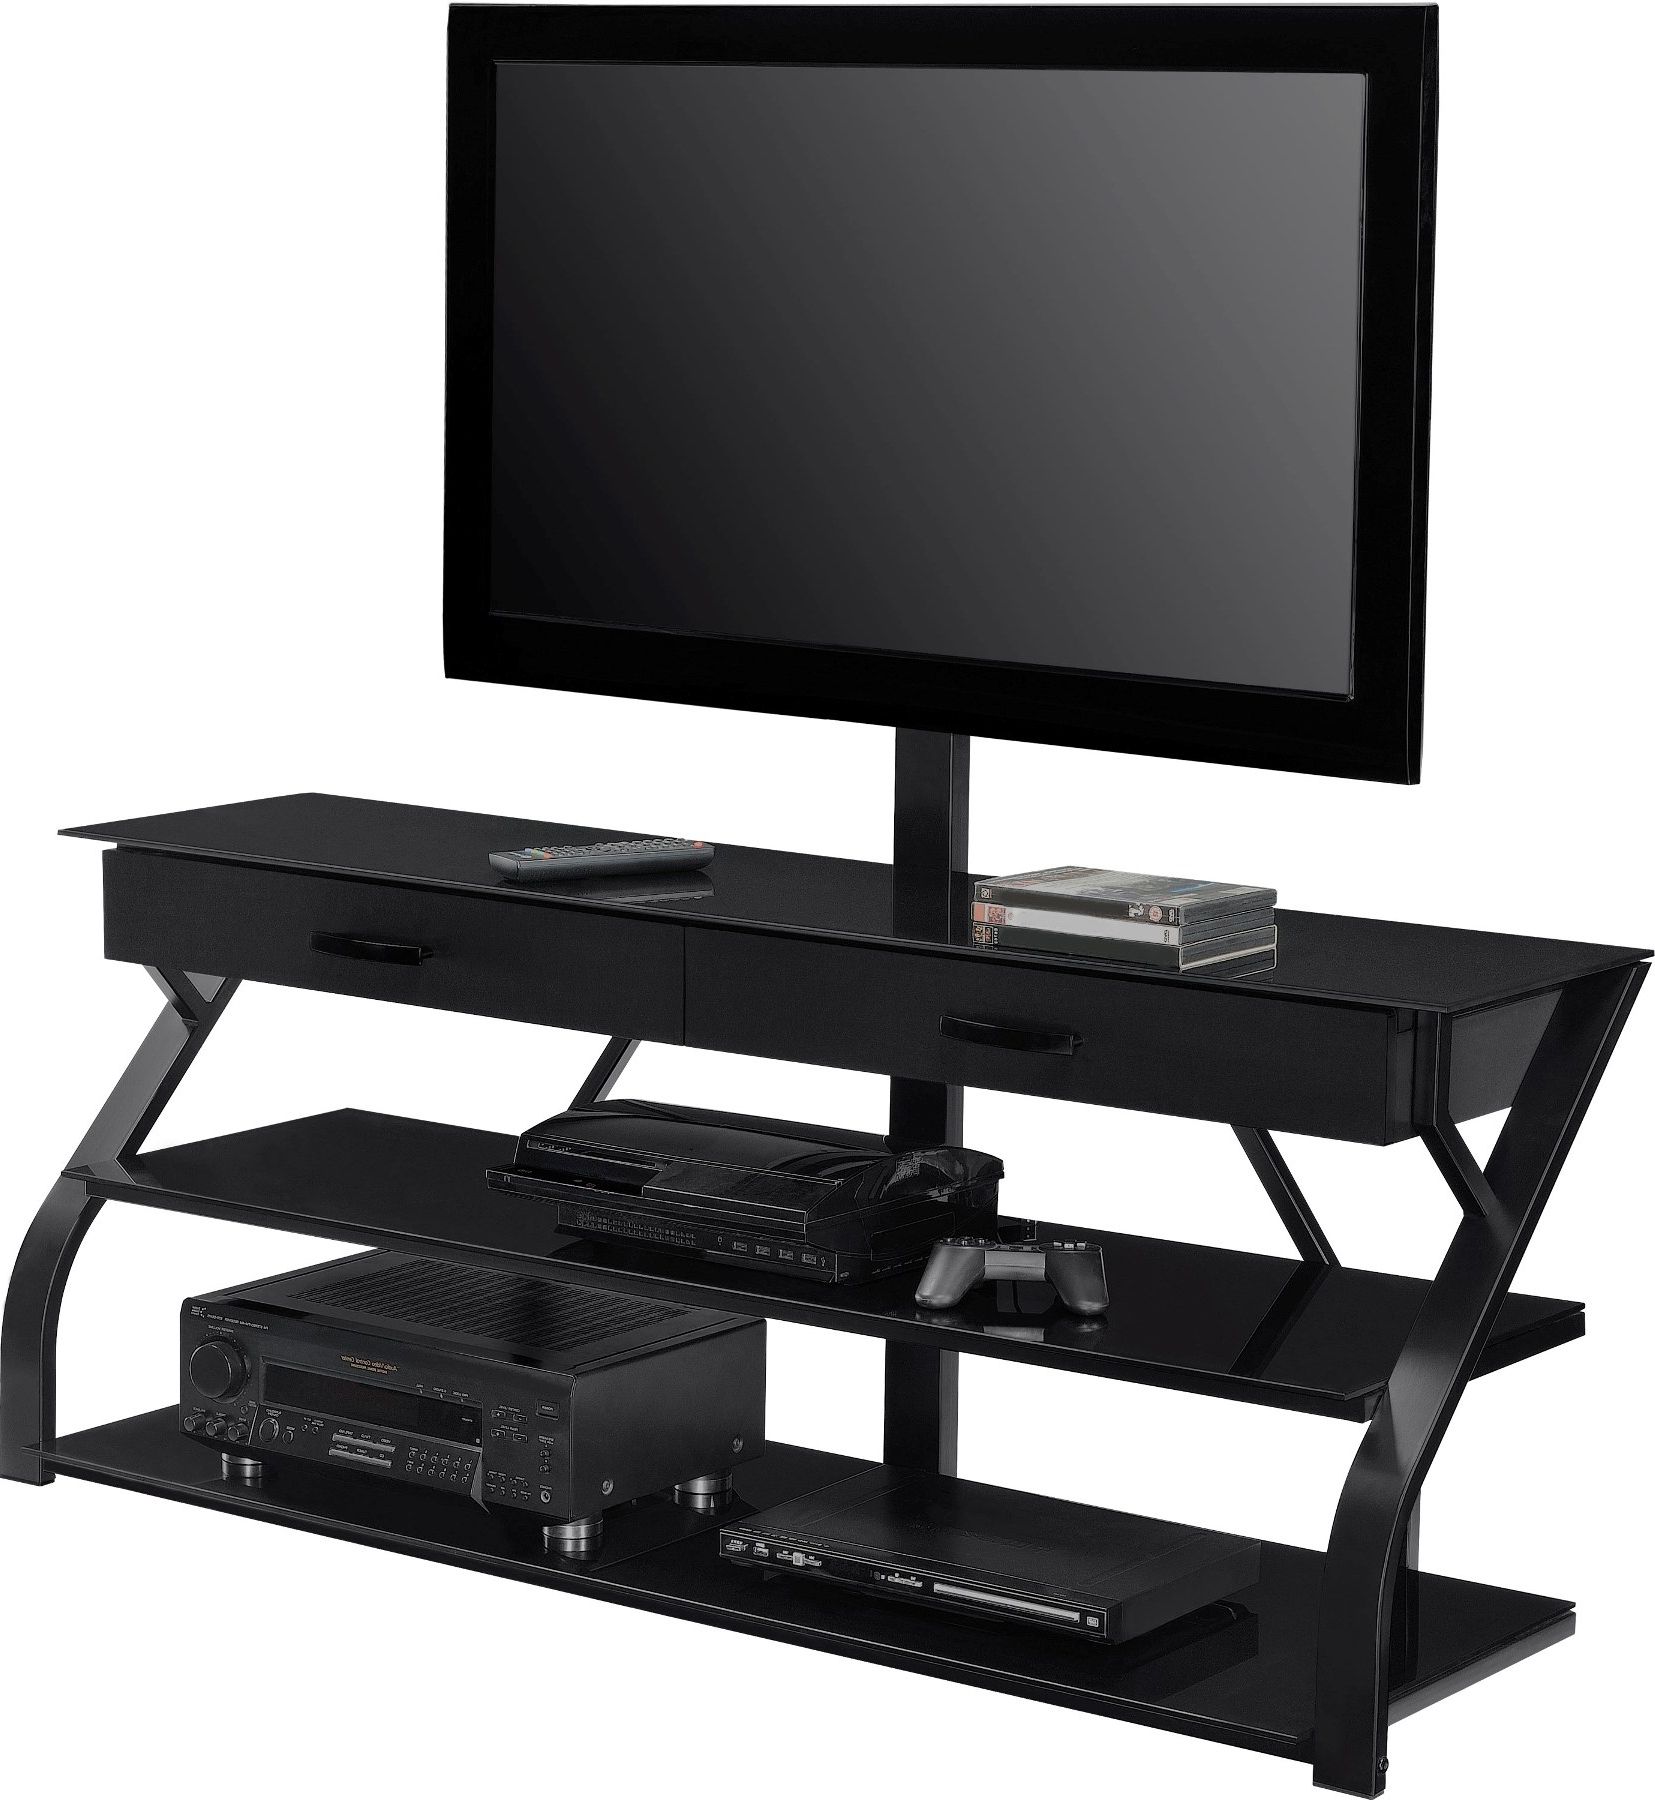 Swivel Black Glass Tv Stands Intended For Latest Black Glass Storage Tv Stand With Mount Of A Gallery Of Trendy Glass (View 2 of 20)